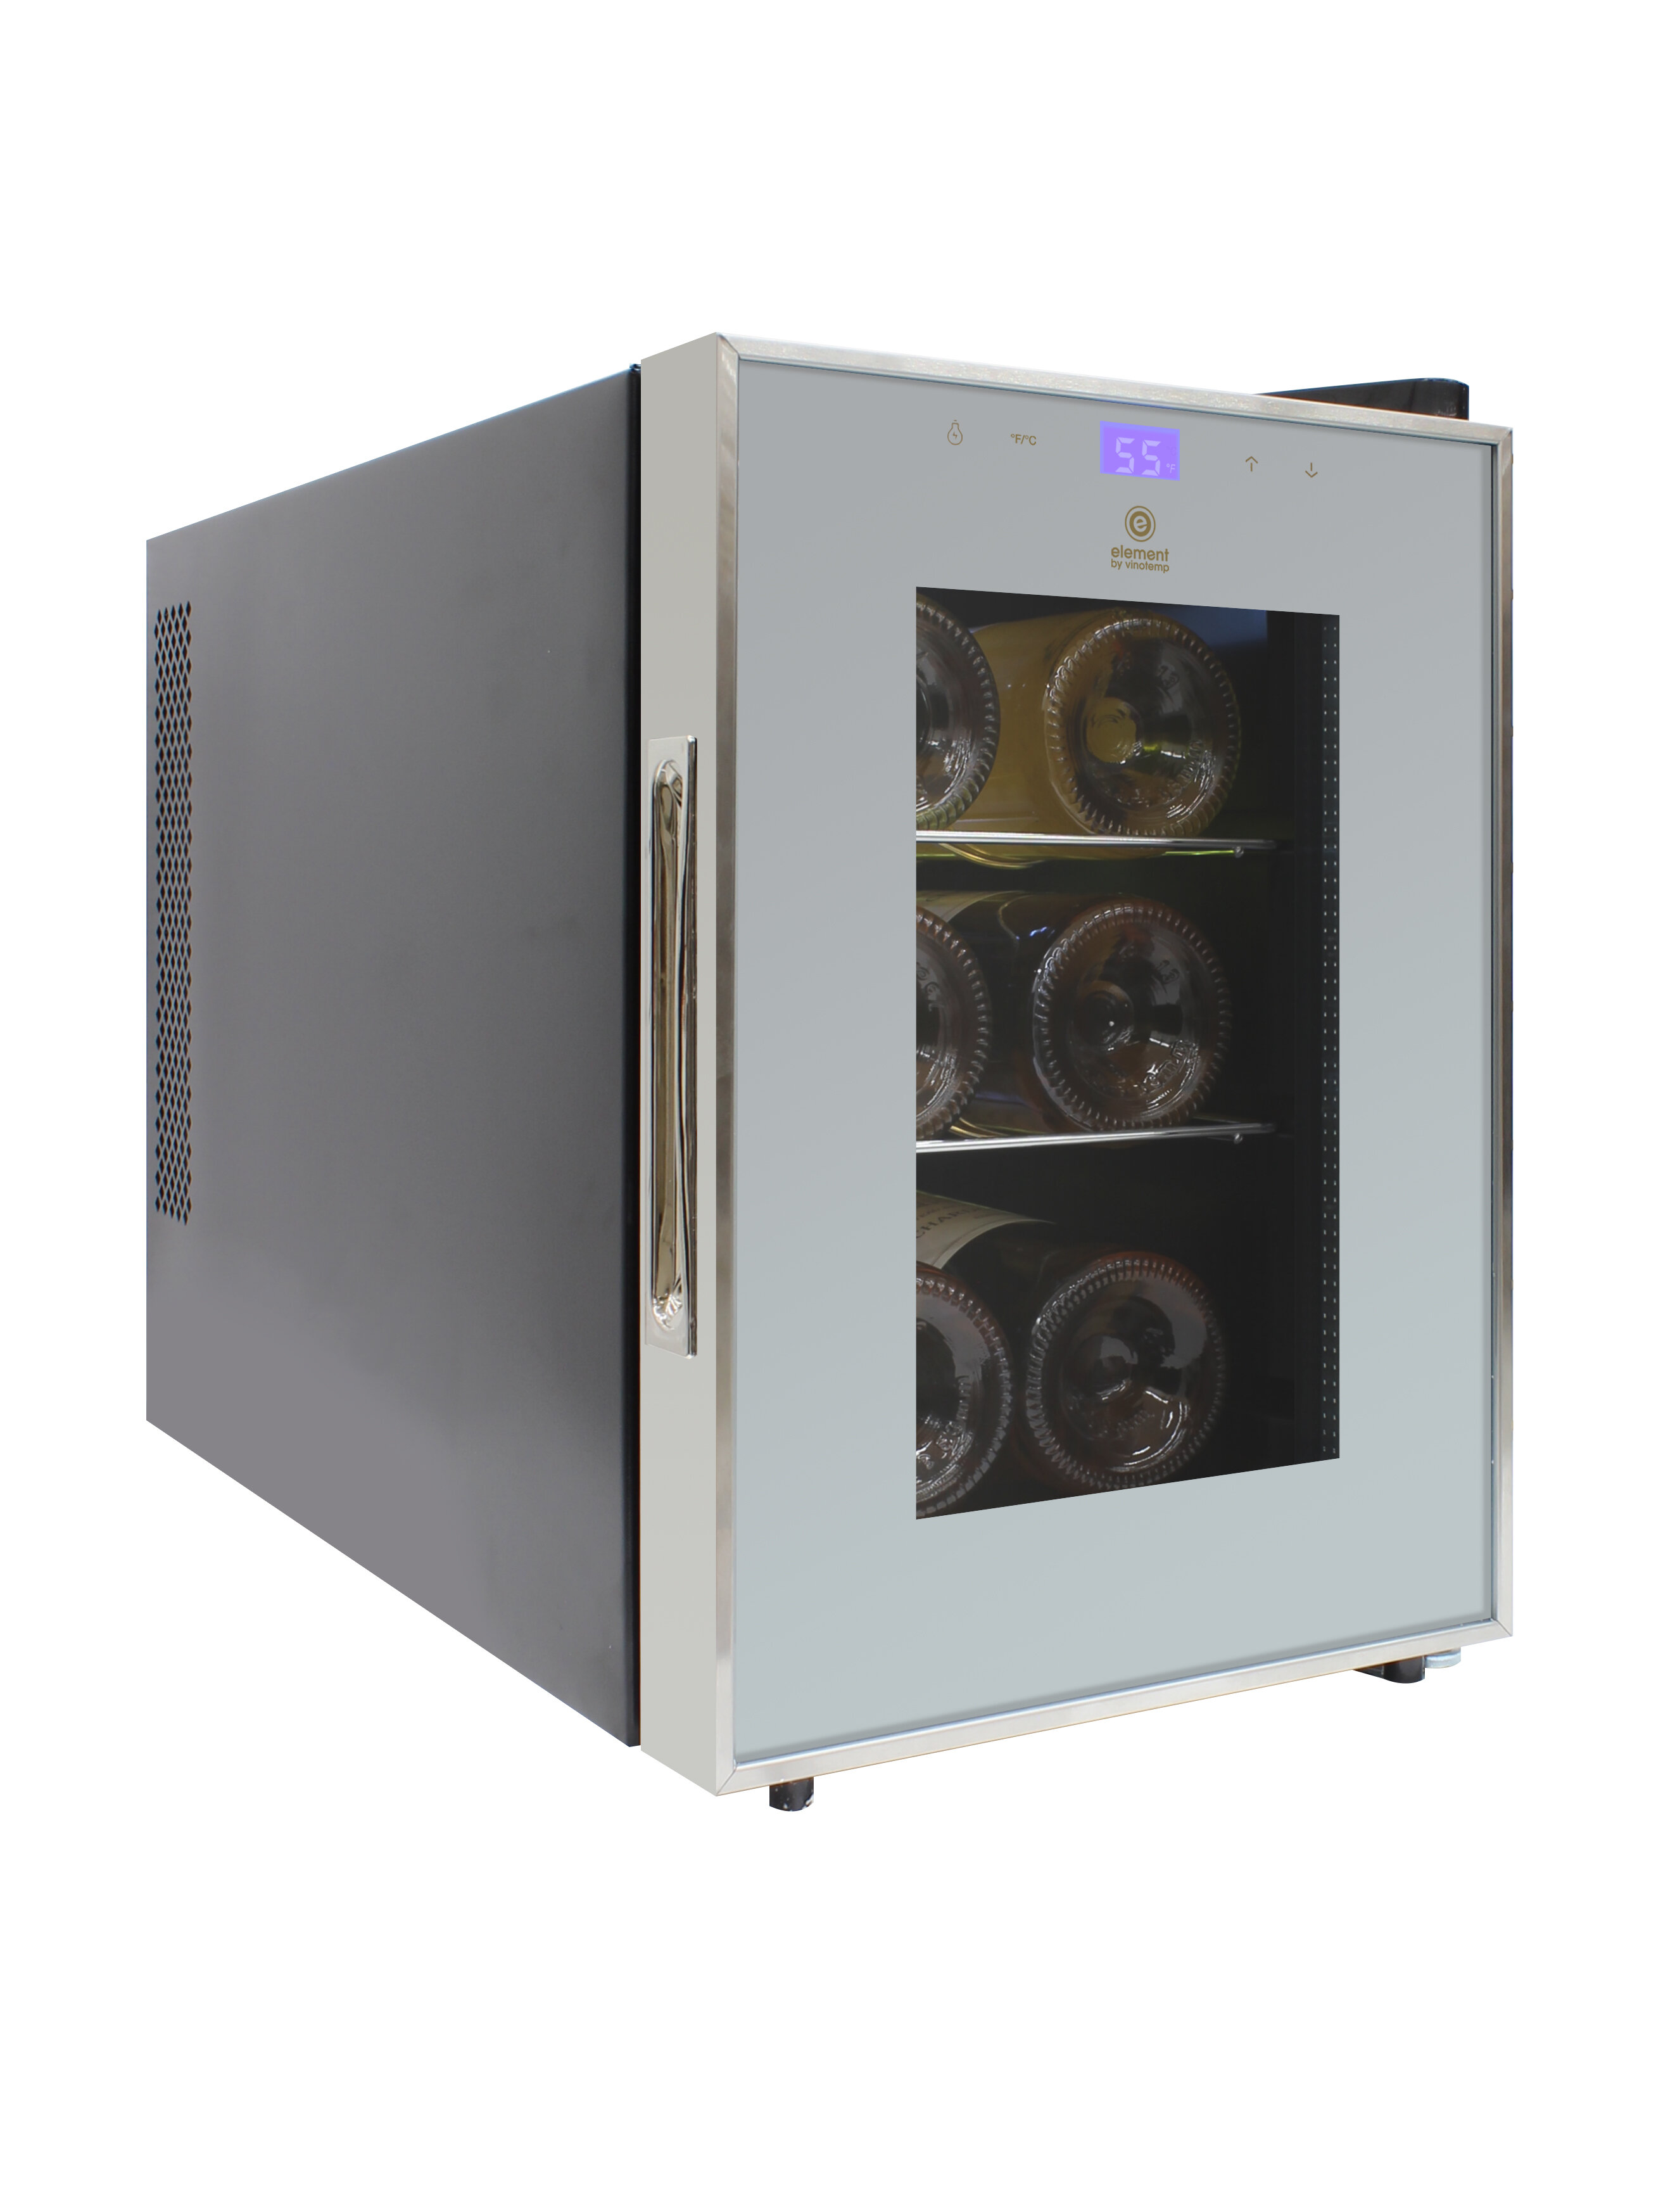 Is a Beverage Cooler the Same as a Mini Fridge? – Vinotemp